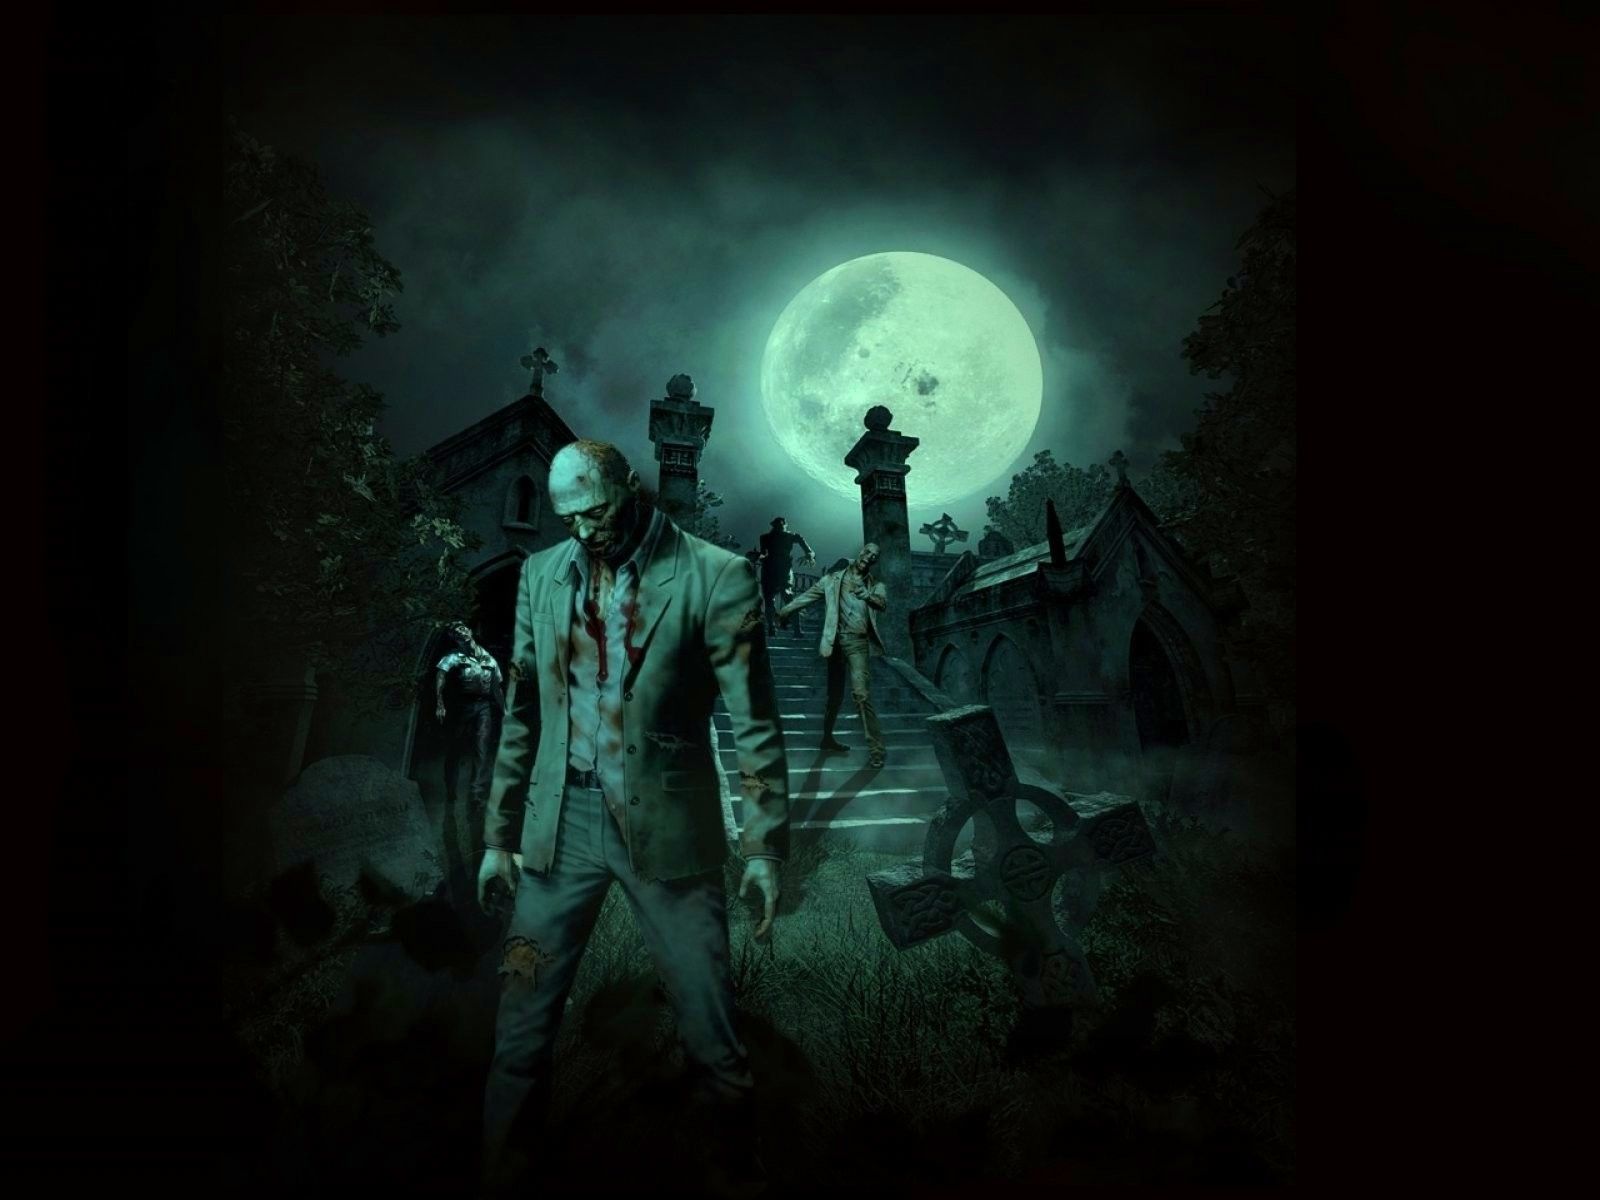 A zombie is standing in front of the moon - Creepy